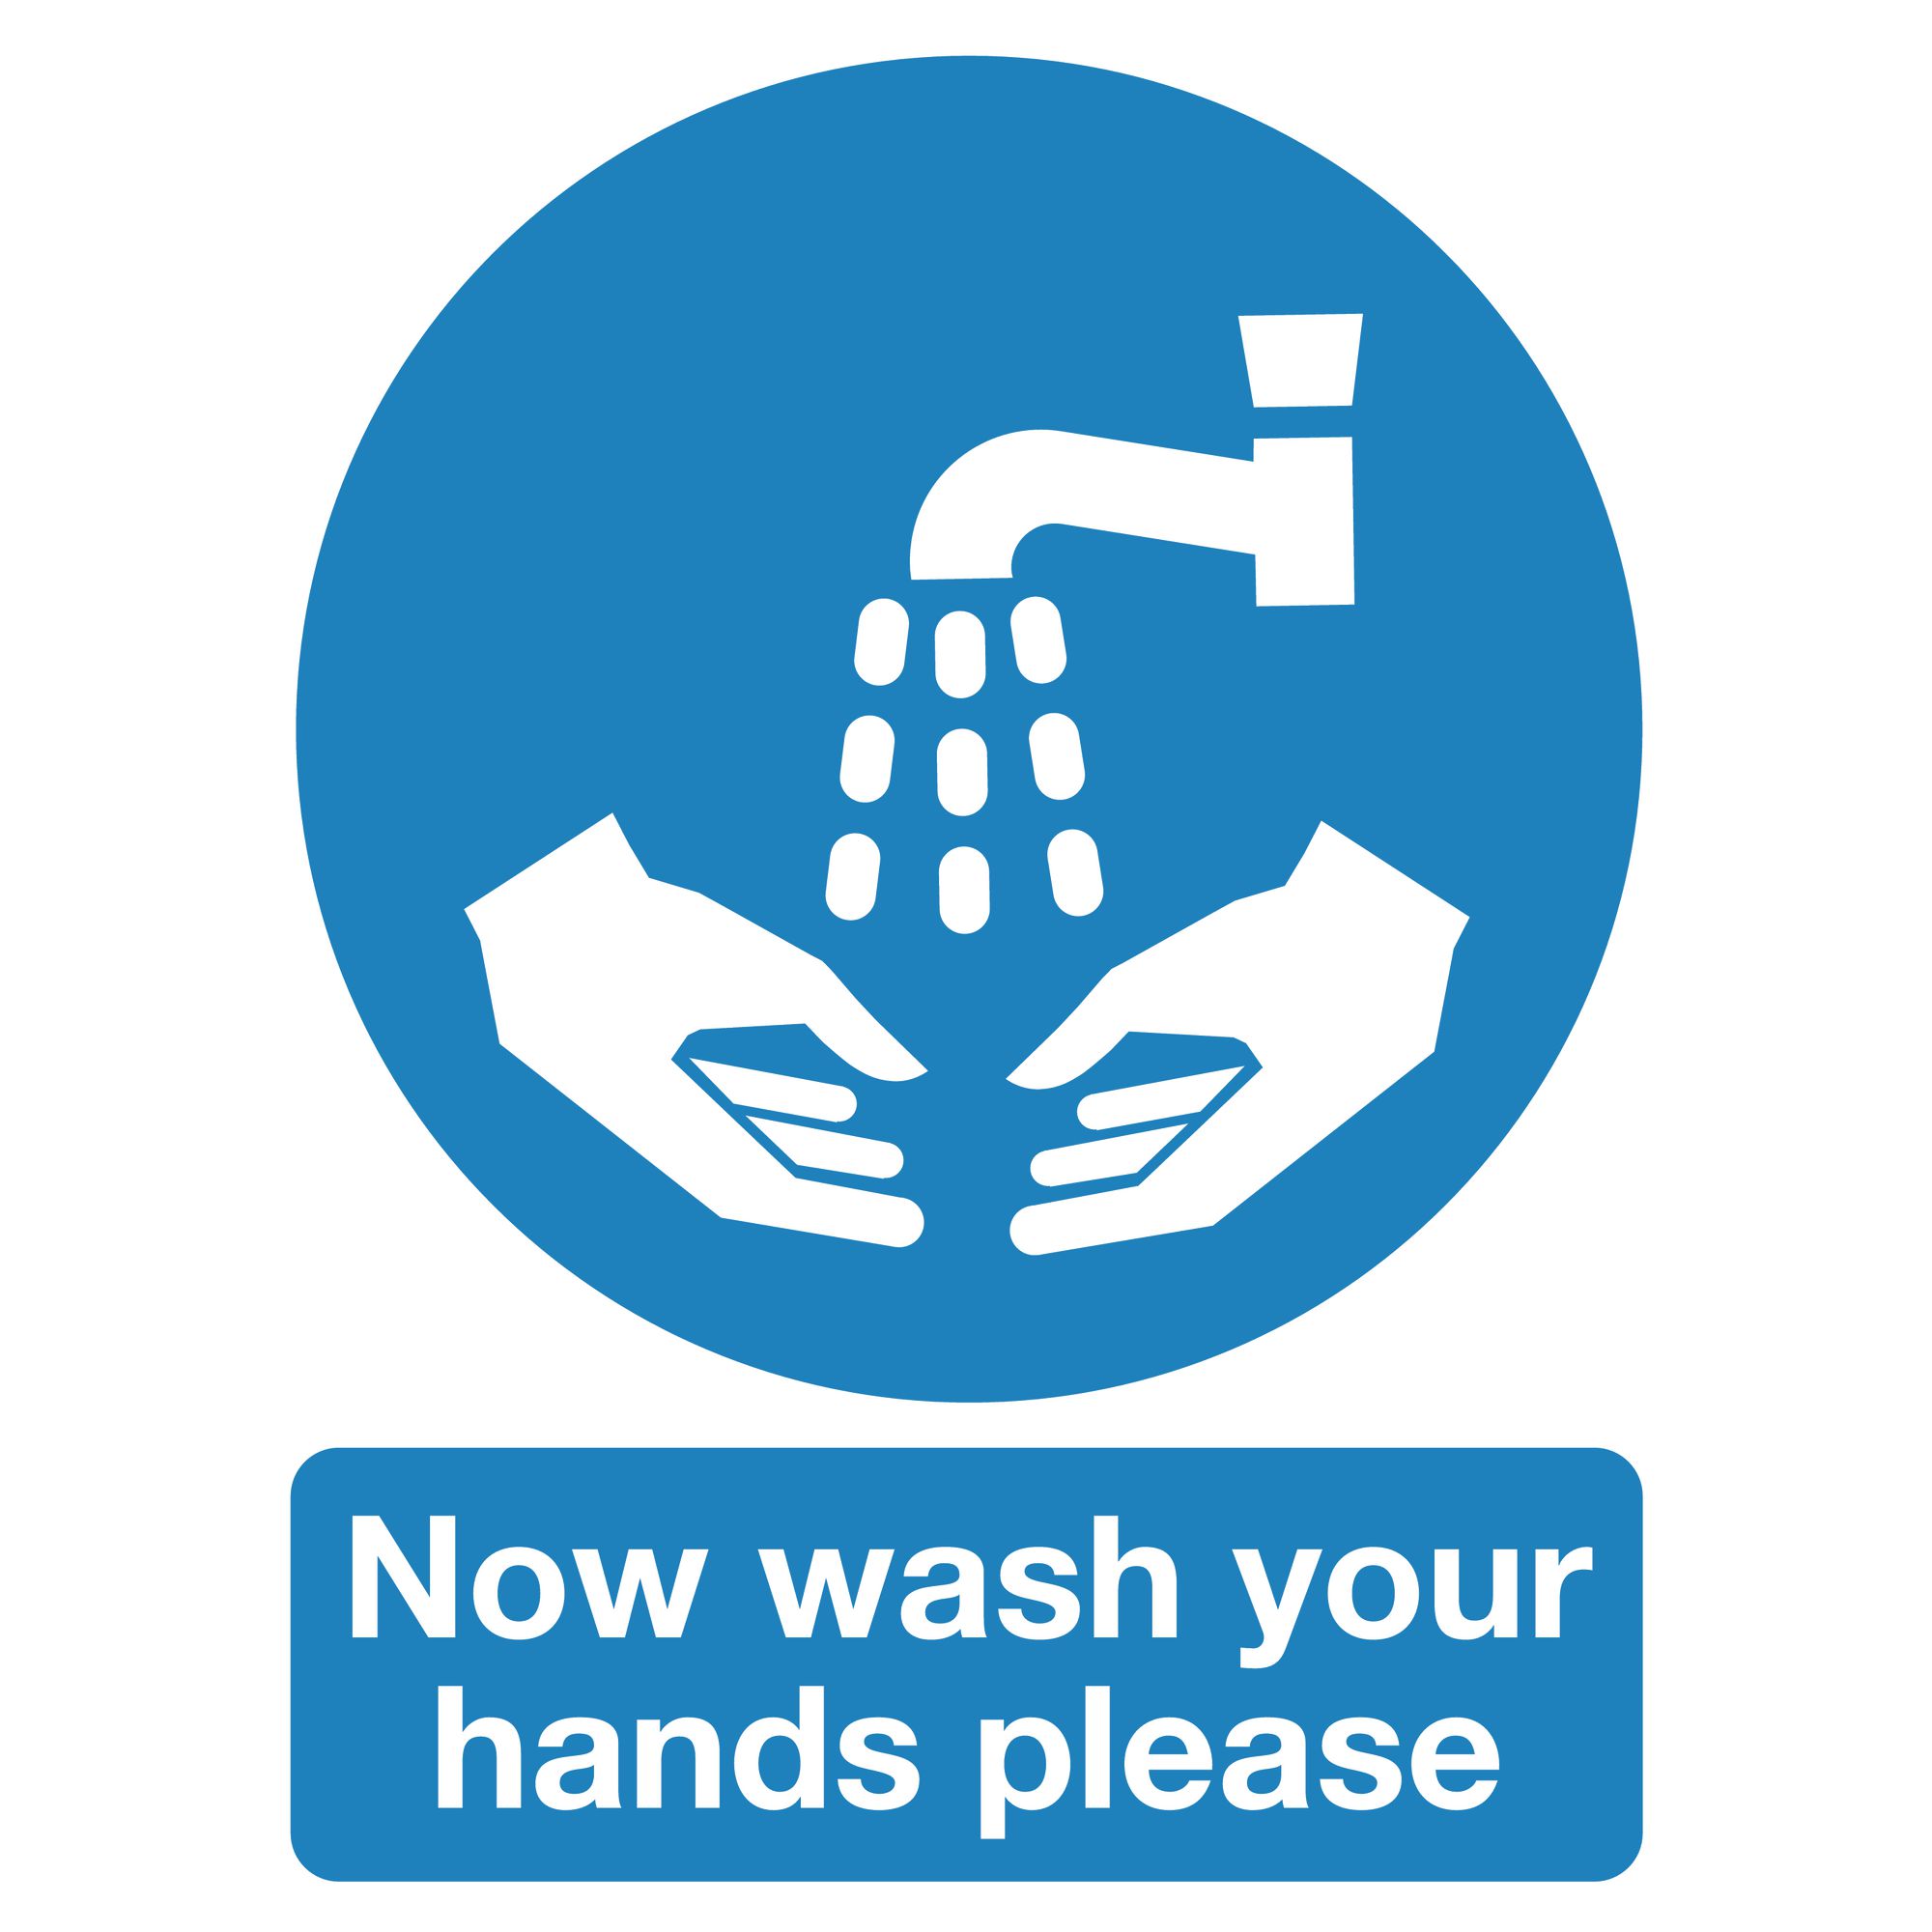 wash-hands-safety-signs-210-x-148mm-s-a-g48173554-gls-educational